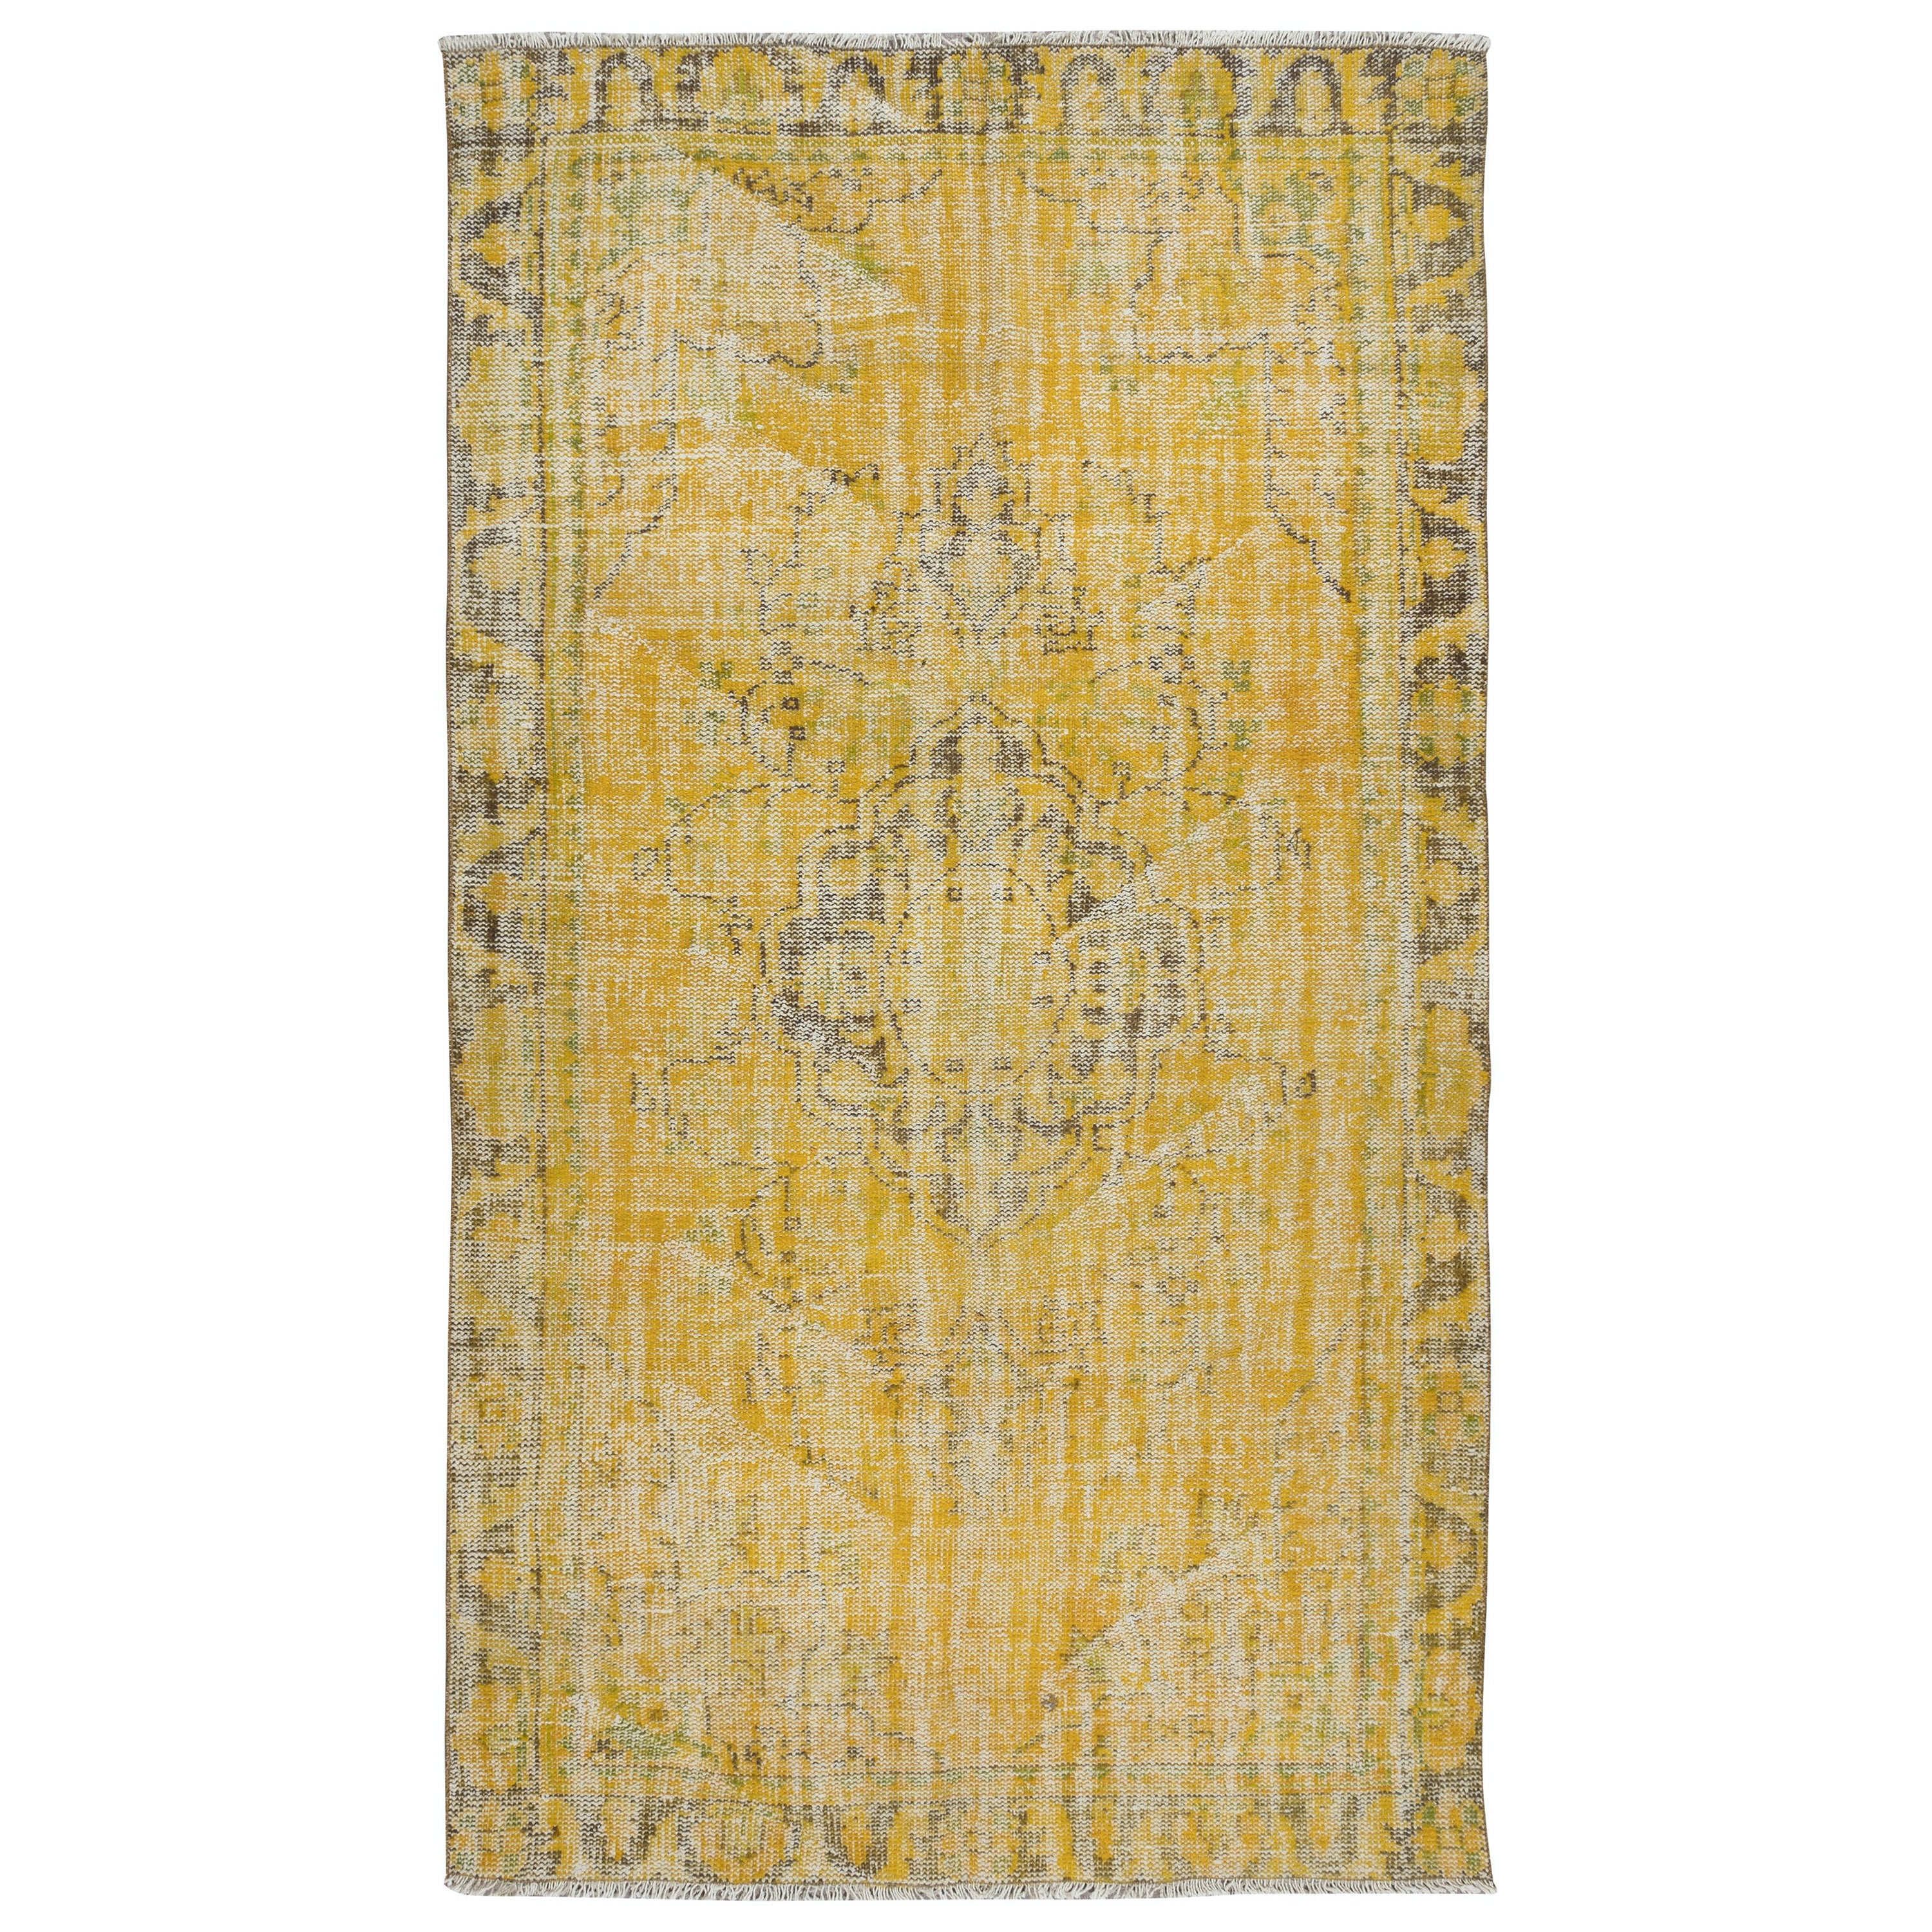 5.7x9.6 Ft Yellow Area Rug From Turkey, Hand Knotted Contemporary Wool Carpet For Sale